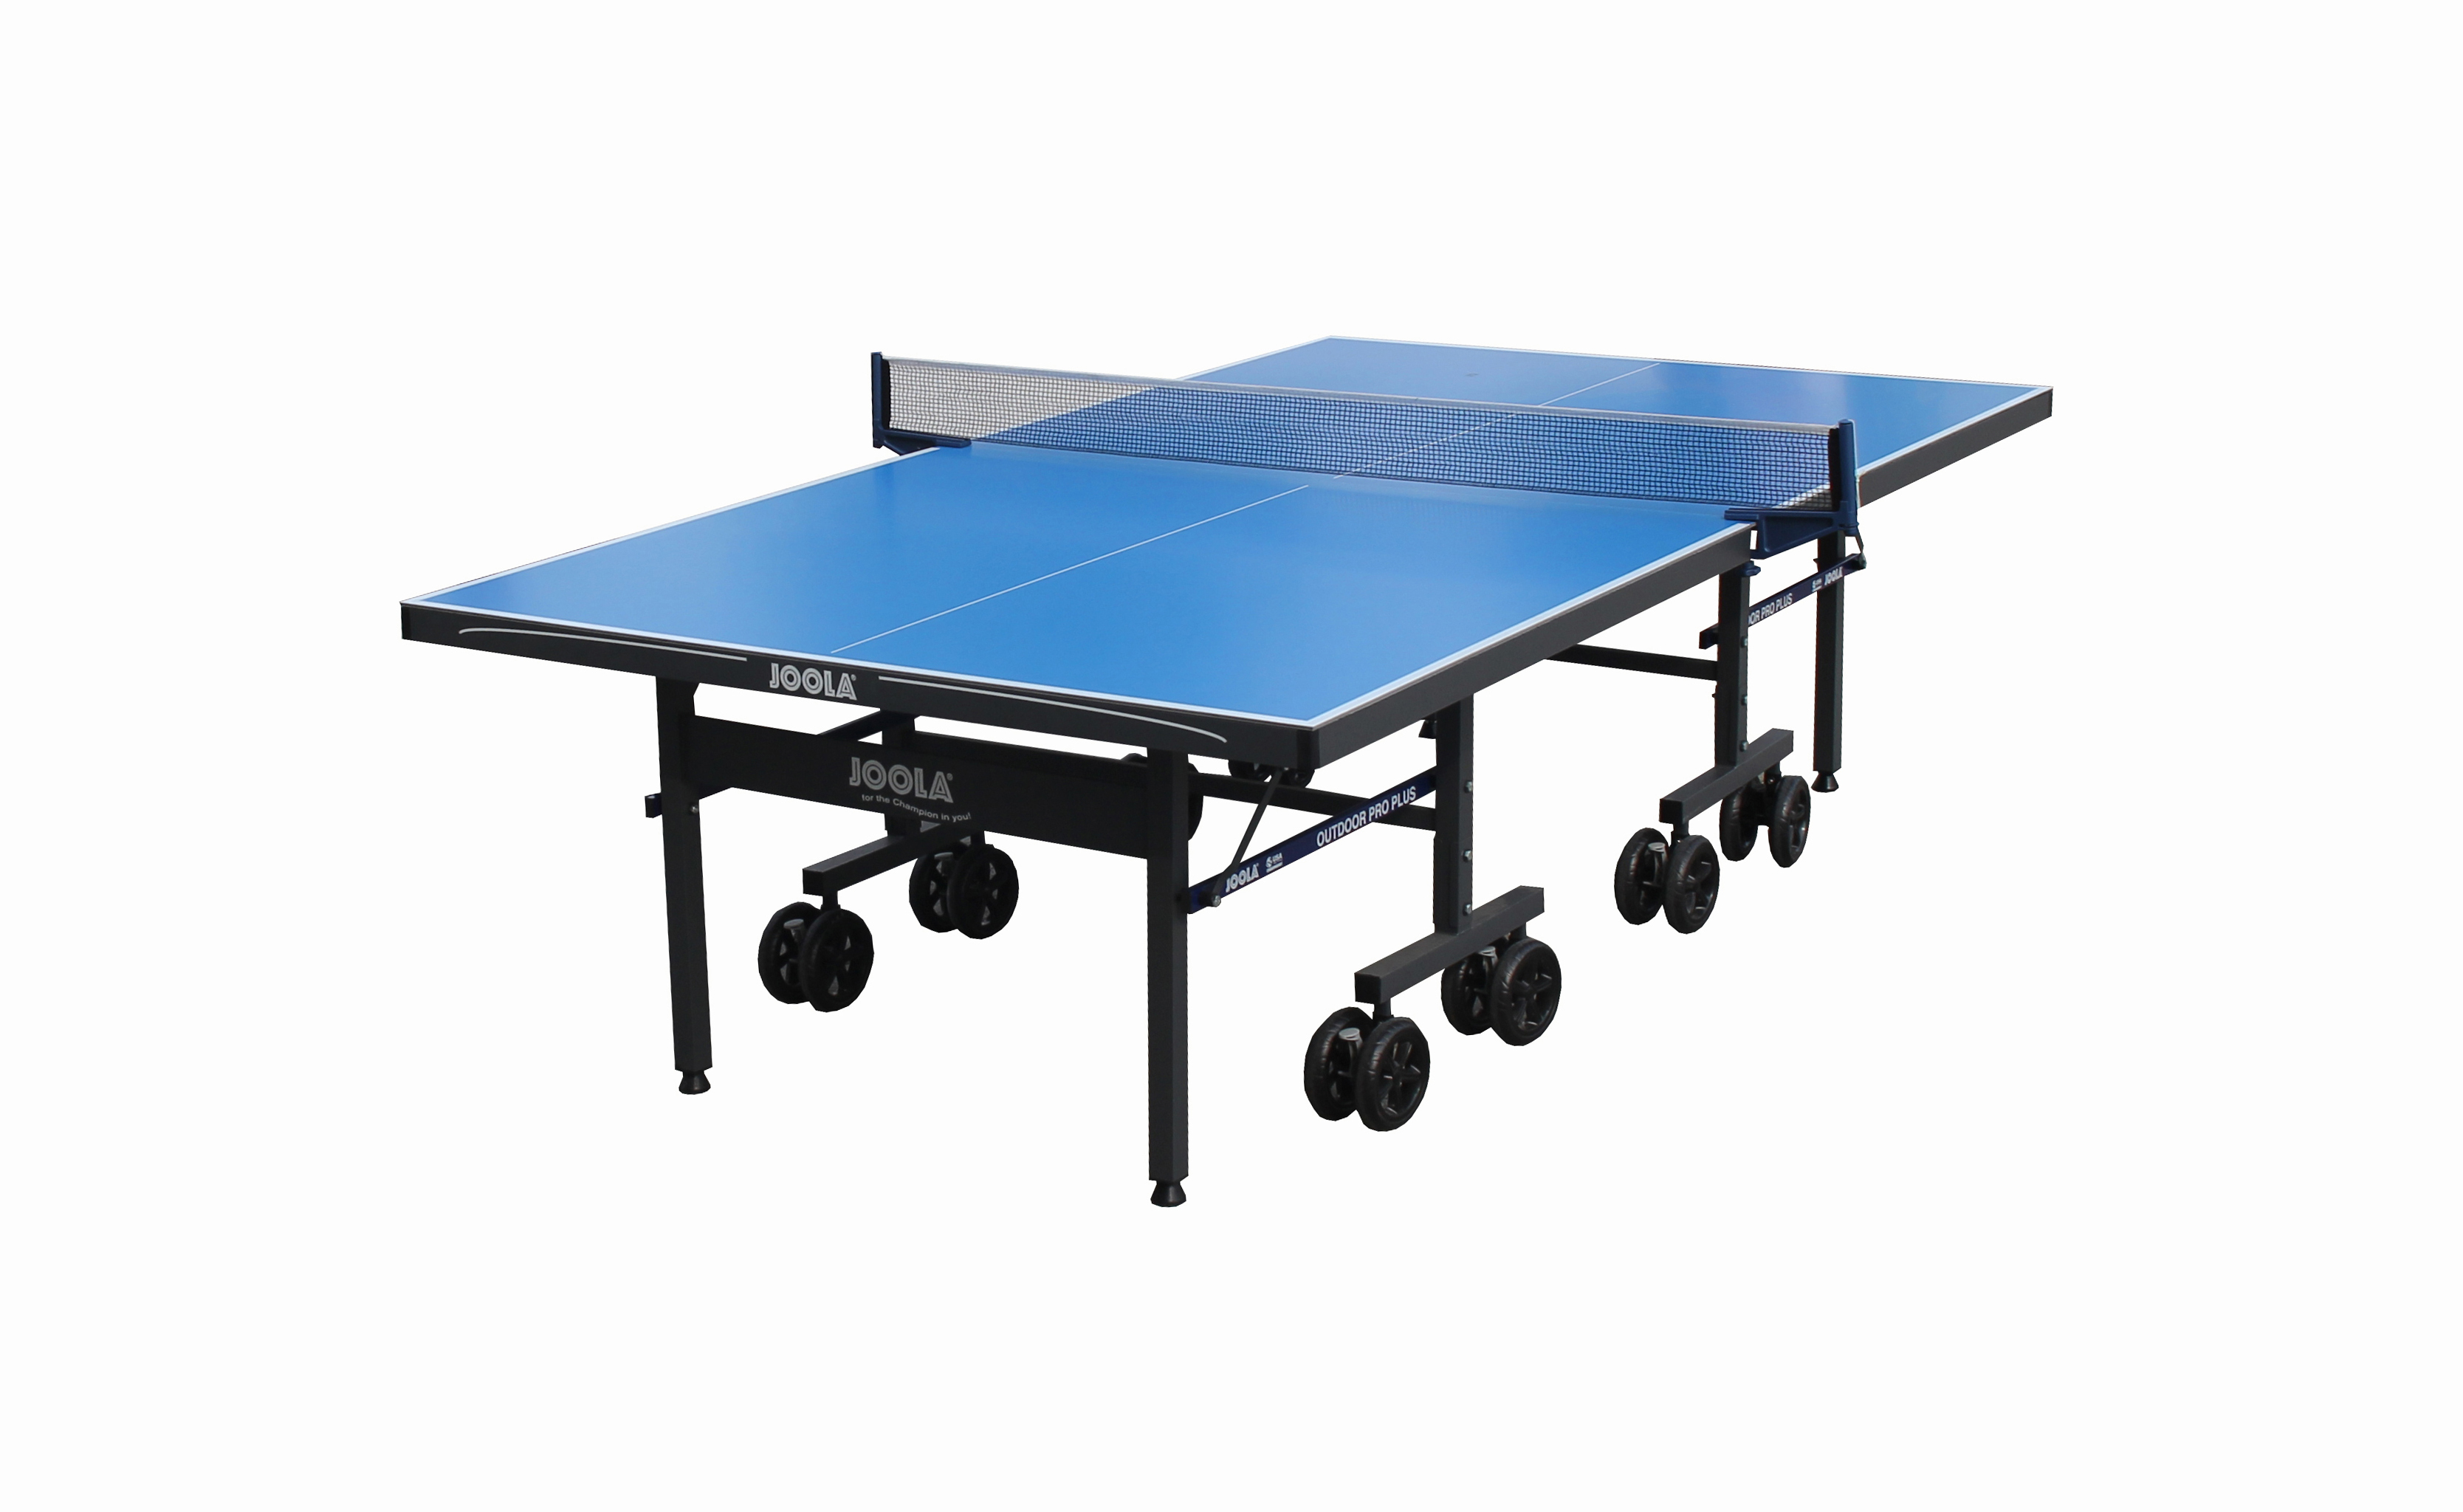 chris okello recommends Poppin Ping Pong Table